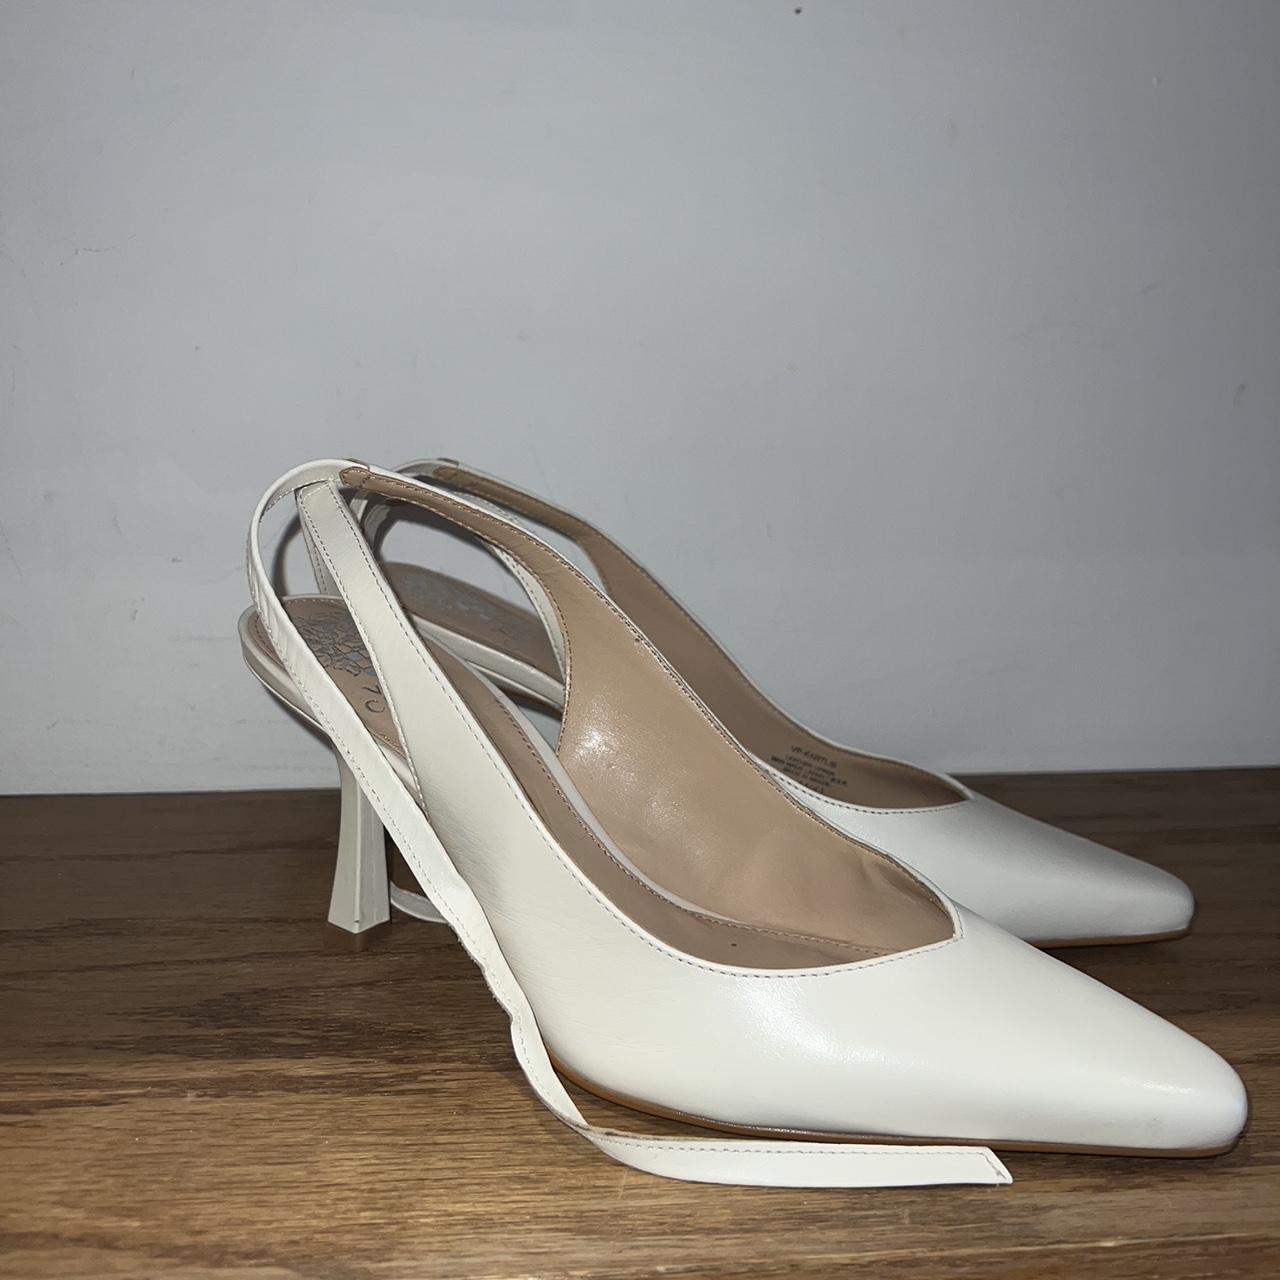 Vince Camuto Women's Cream and White Courts (2)